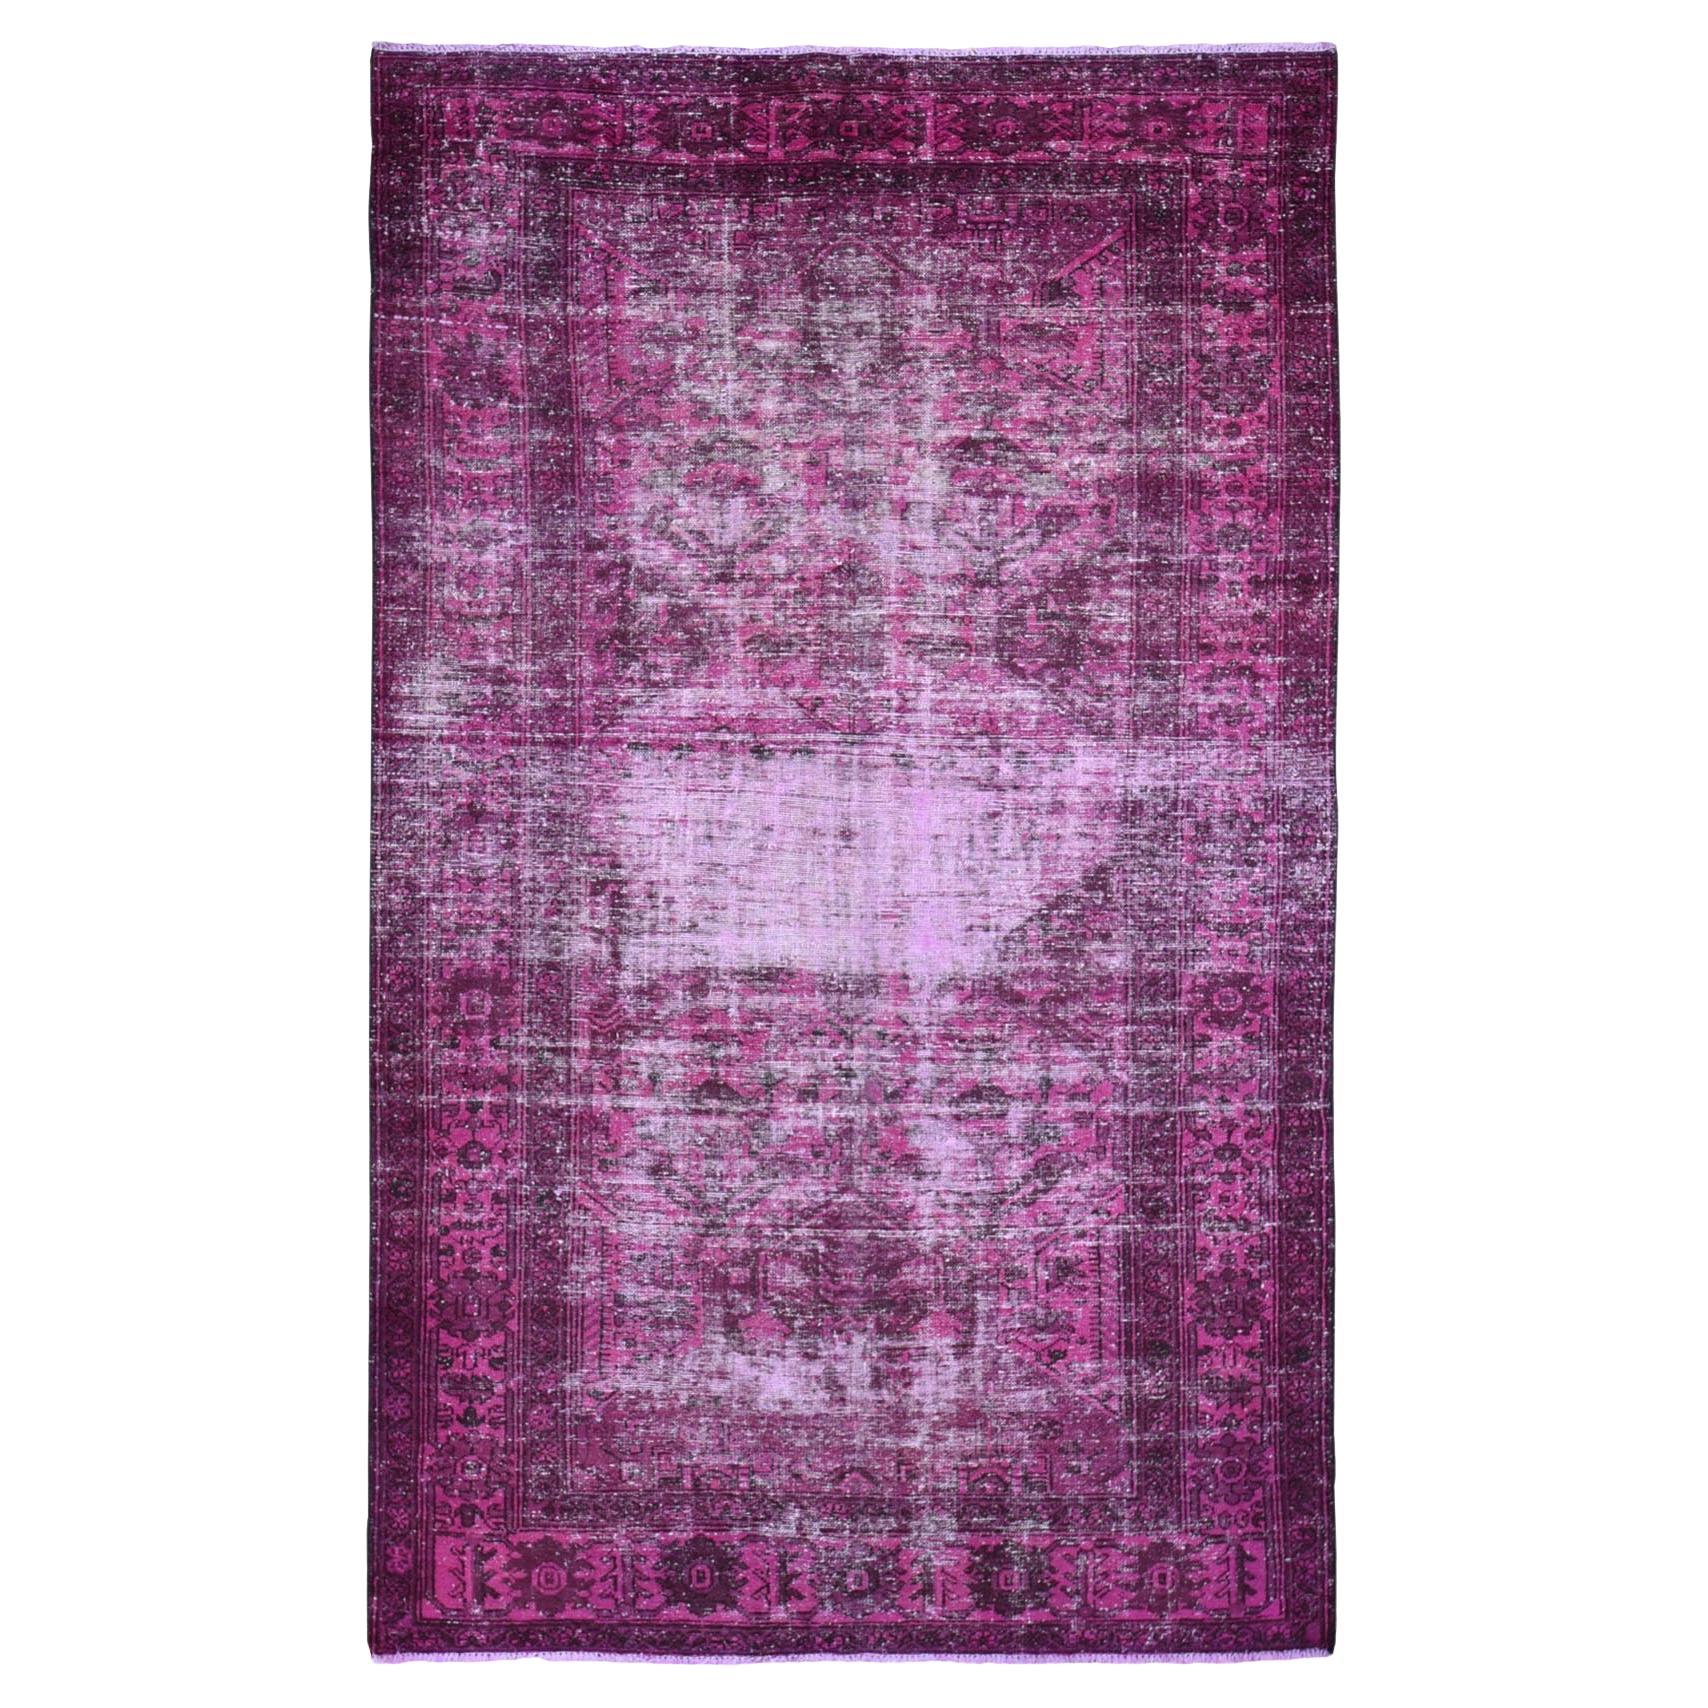 Gallery Size Pink Vintage and Worn Down Persian Bakhtiari Hand Knotted Wool Rug